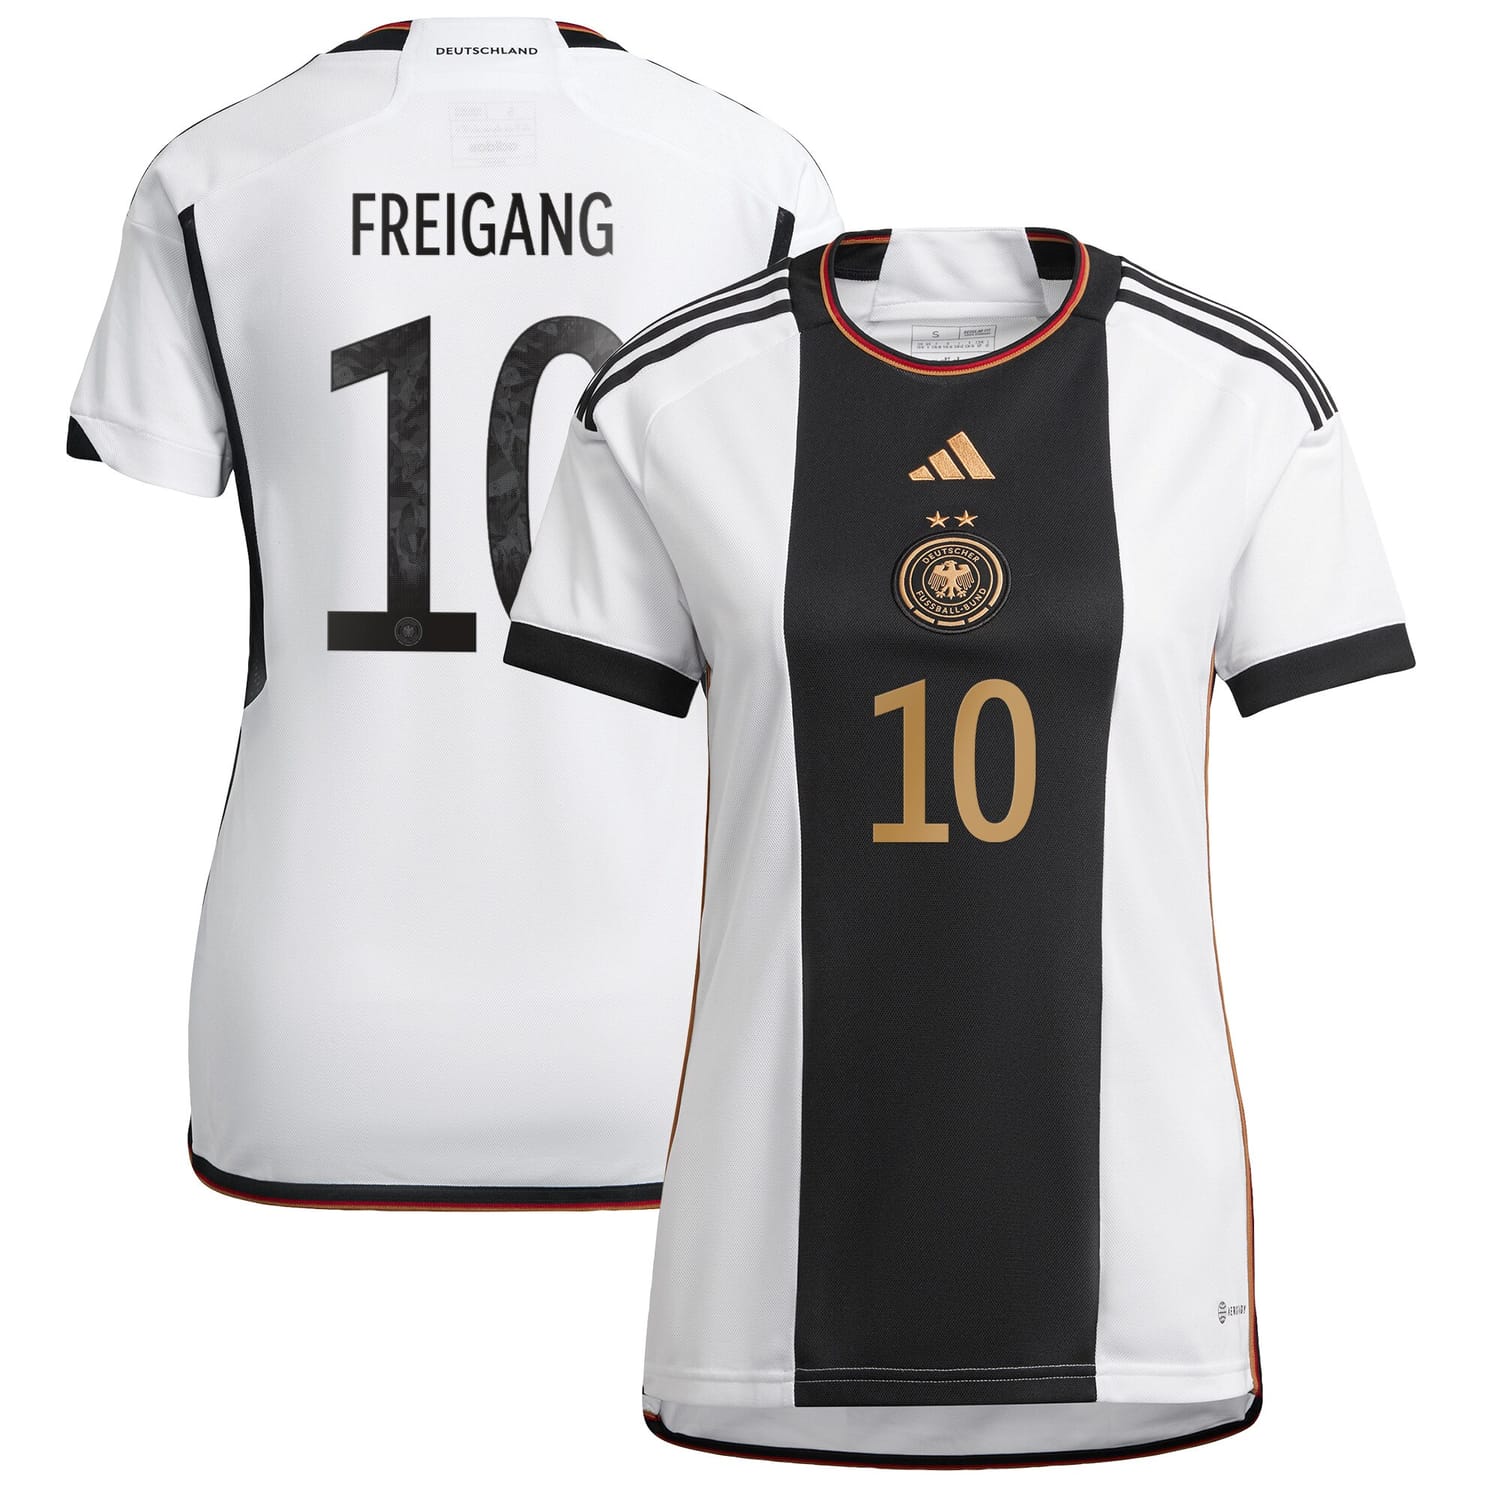 Germany National Team Home Jersey Shirt player Laura Freigang 10 printing for Women